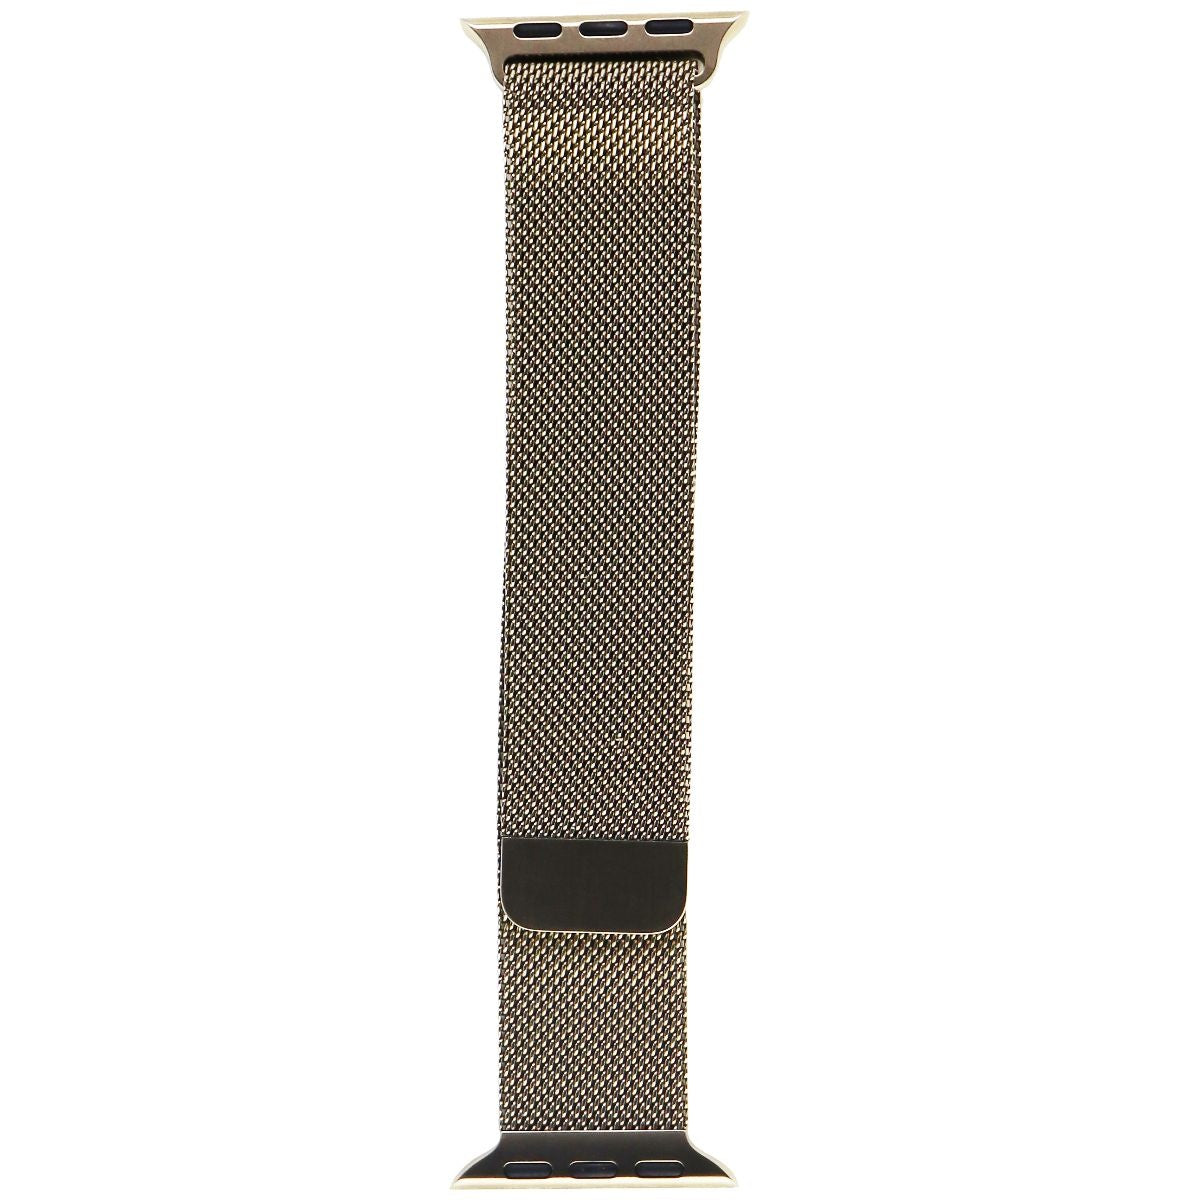 Apple (41mm) Milanese Loop Band for Apple Watch 38/40/41mm - Gold